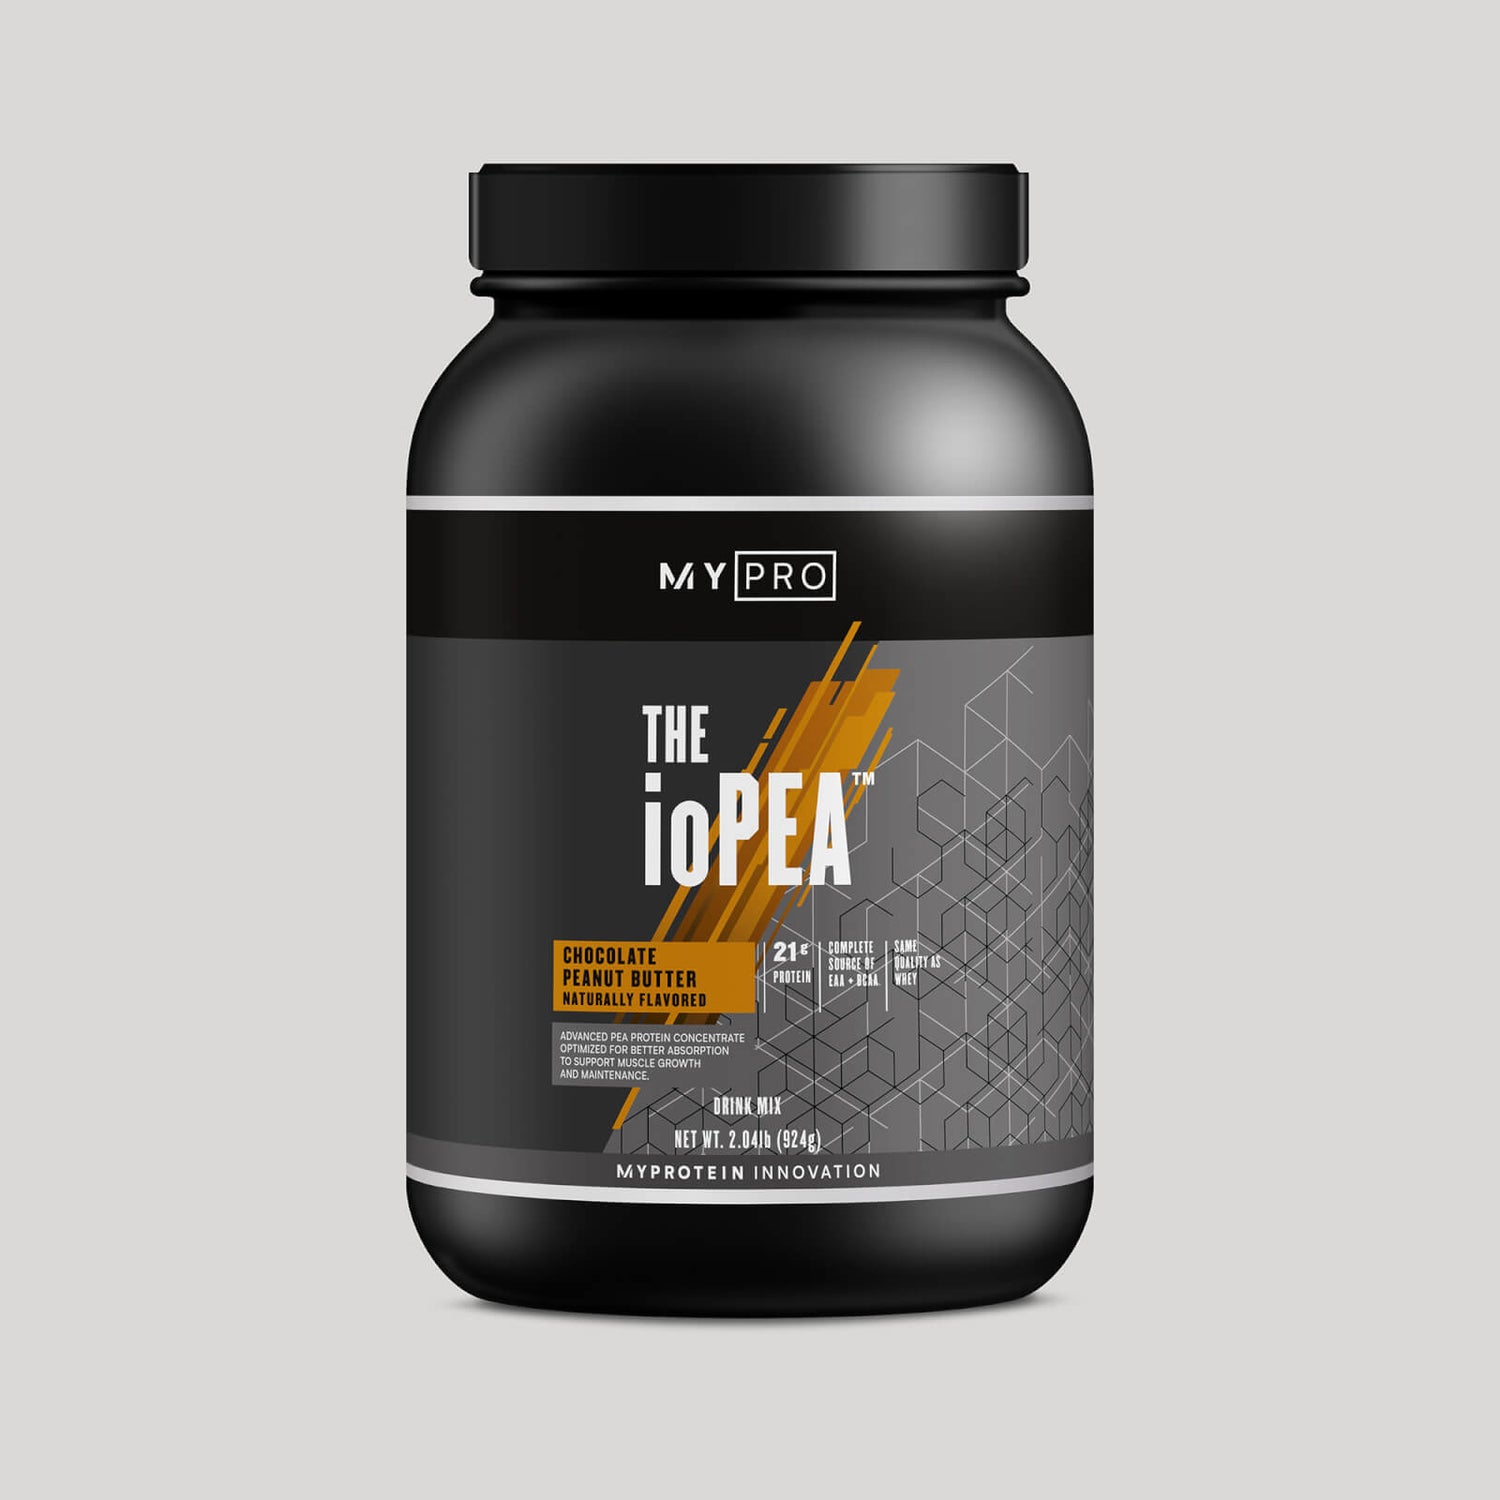 THE ioPEA - 30servings - Chocolate Peanut Butter